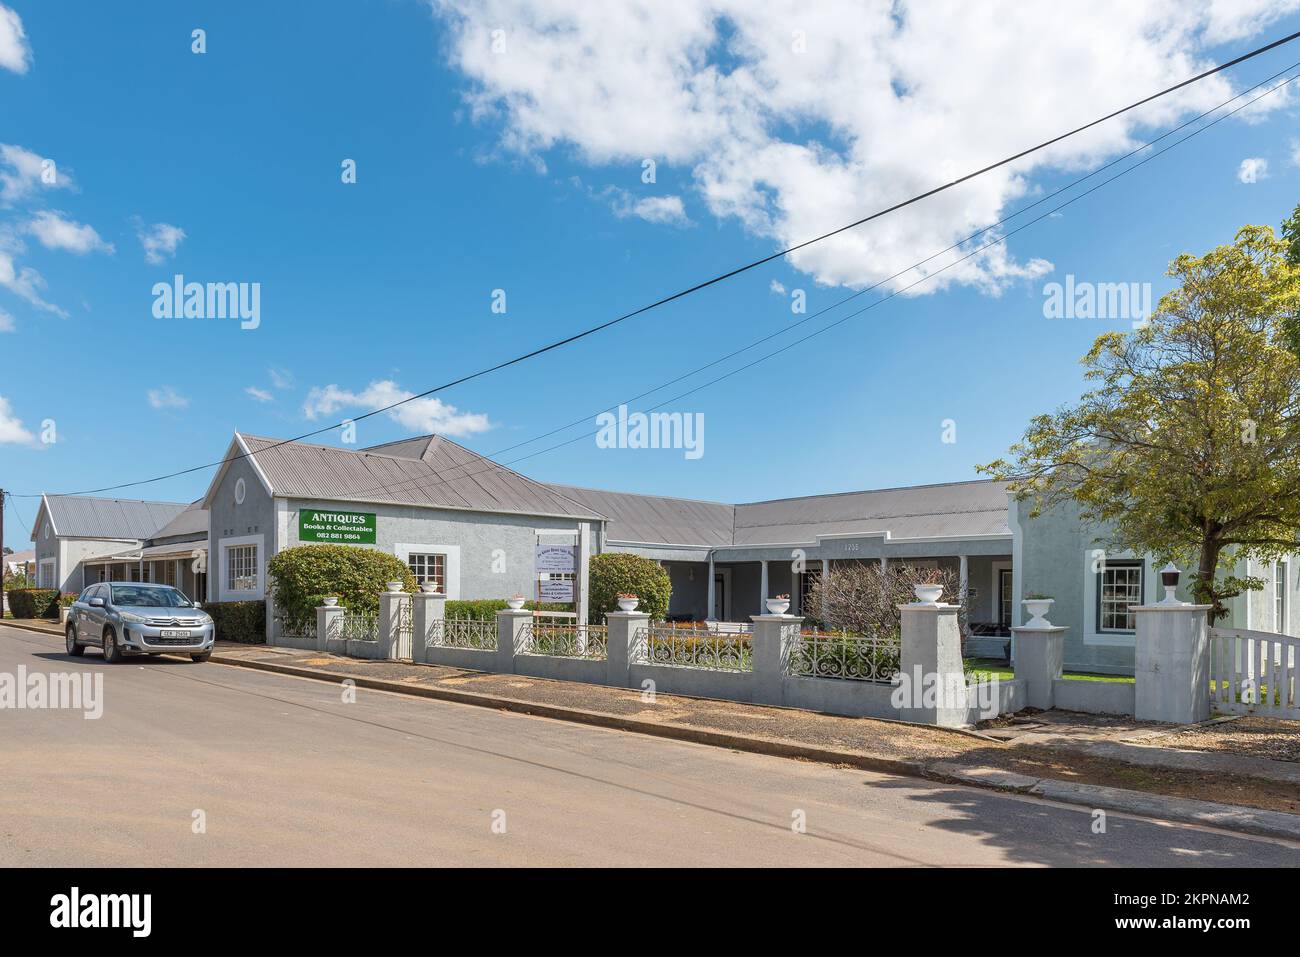 Stanford, South Africa - Sep 20, 2022: A street scene, with businesses, in Stanford in the Western Cape Province Stock Photo